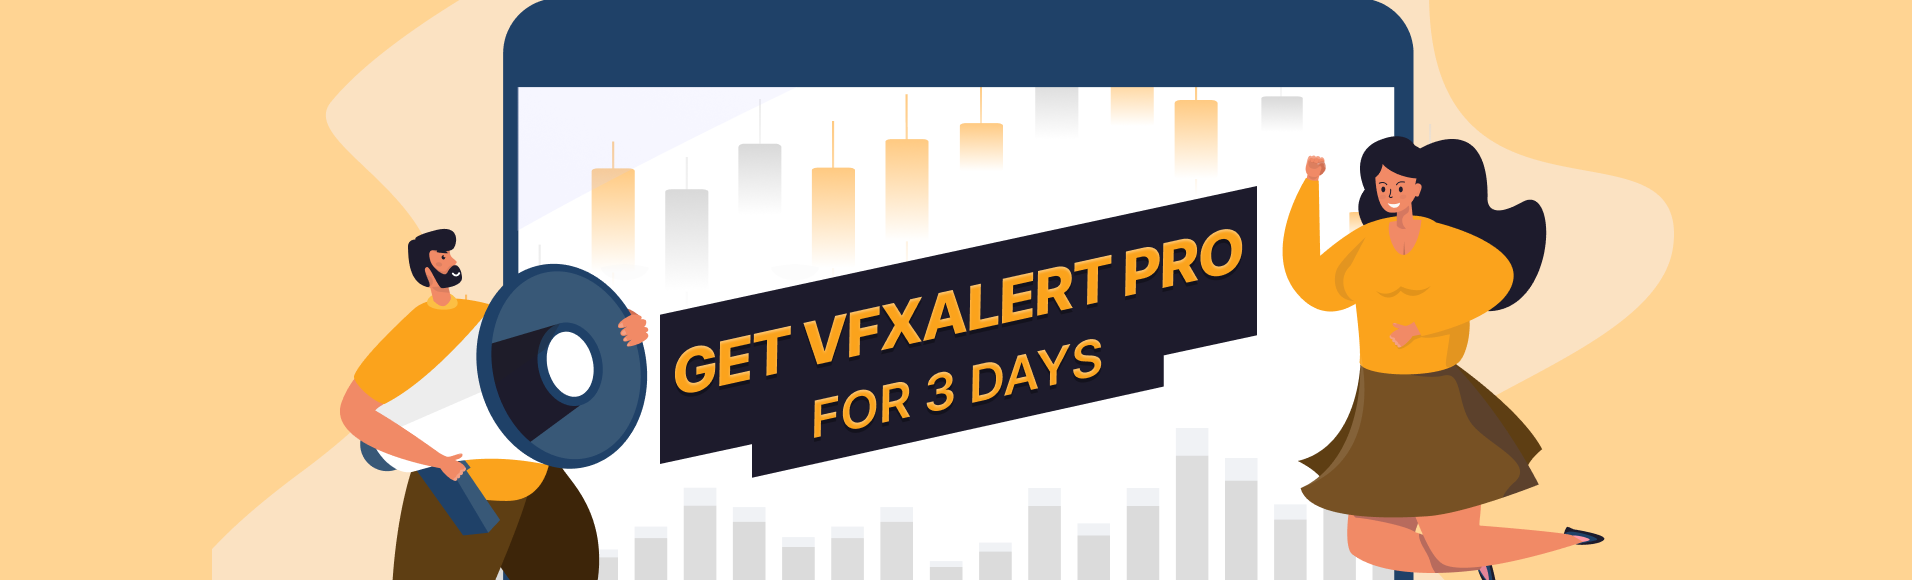 Terms and conditions of the "vfxAlert PRO for 3 days" promotion.